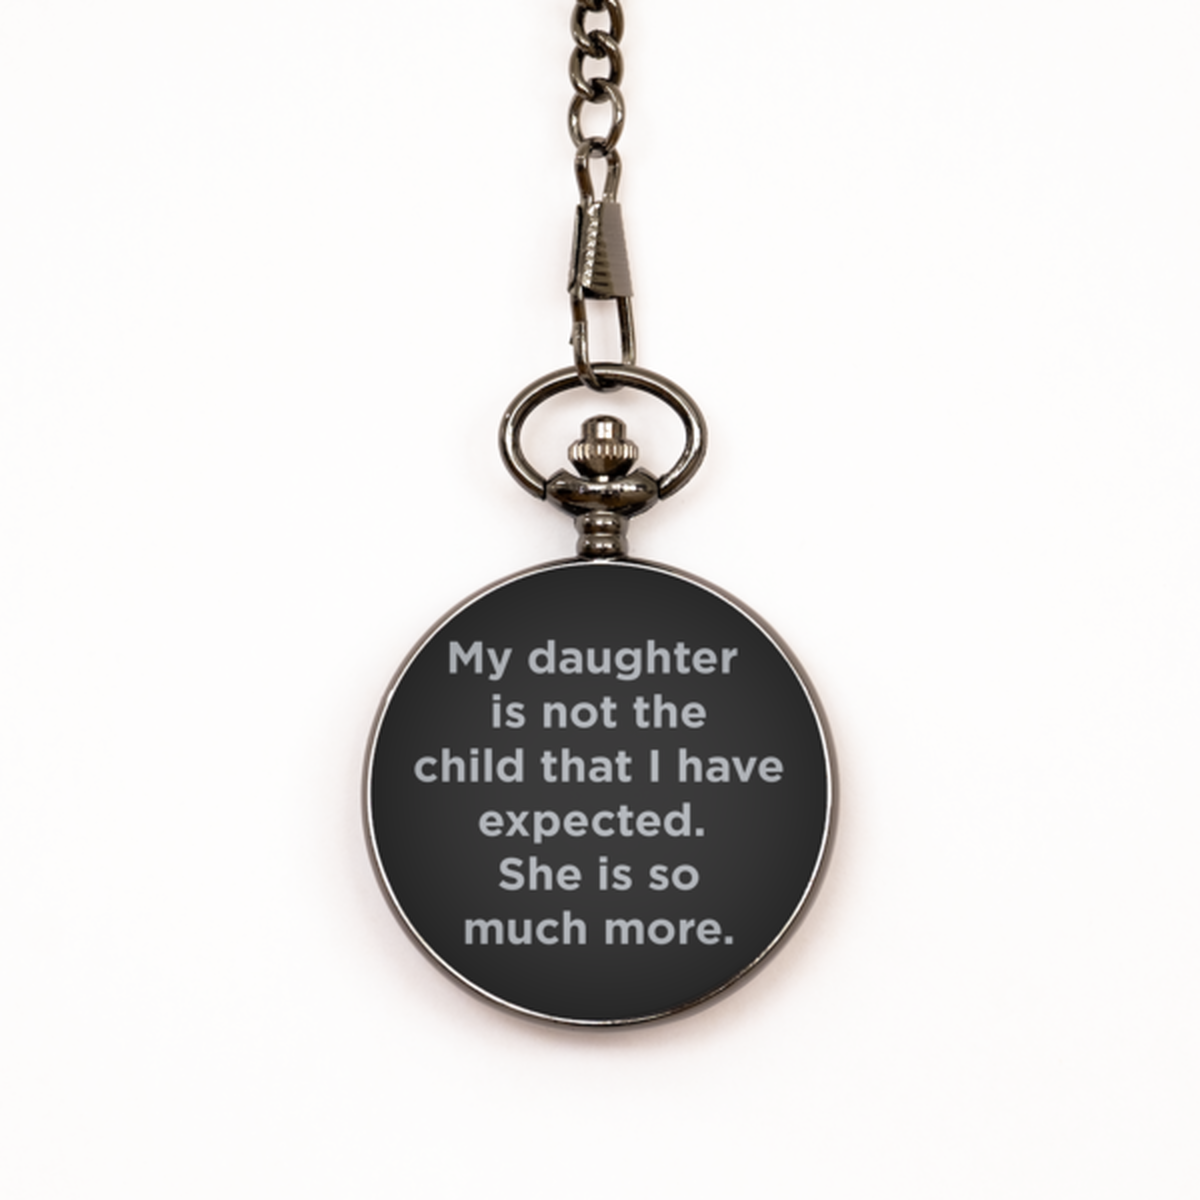 To My Daughter Black Pocket Watch, She Is So Much More, Birthday Gifts For Daughter From Mom, Christmas Gifts For Women